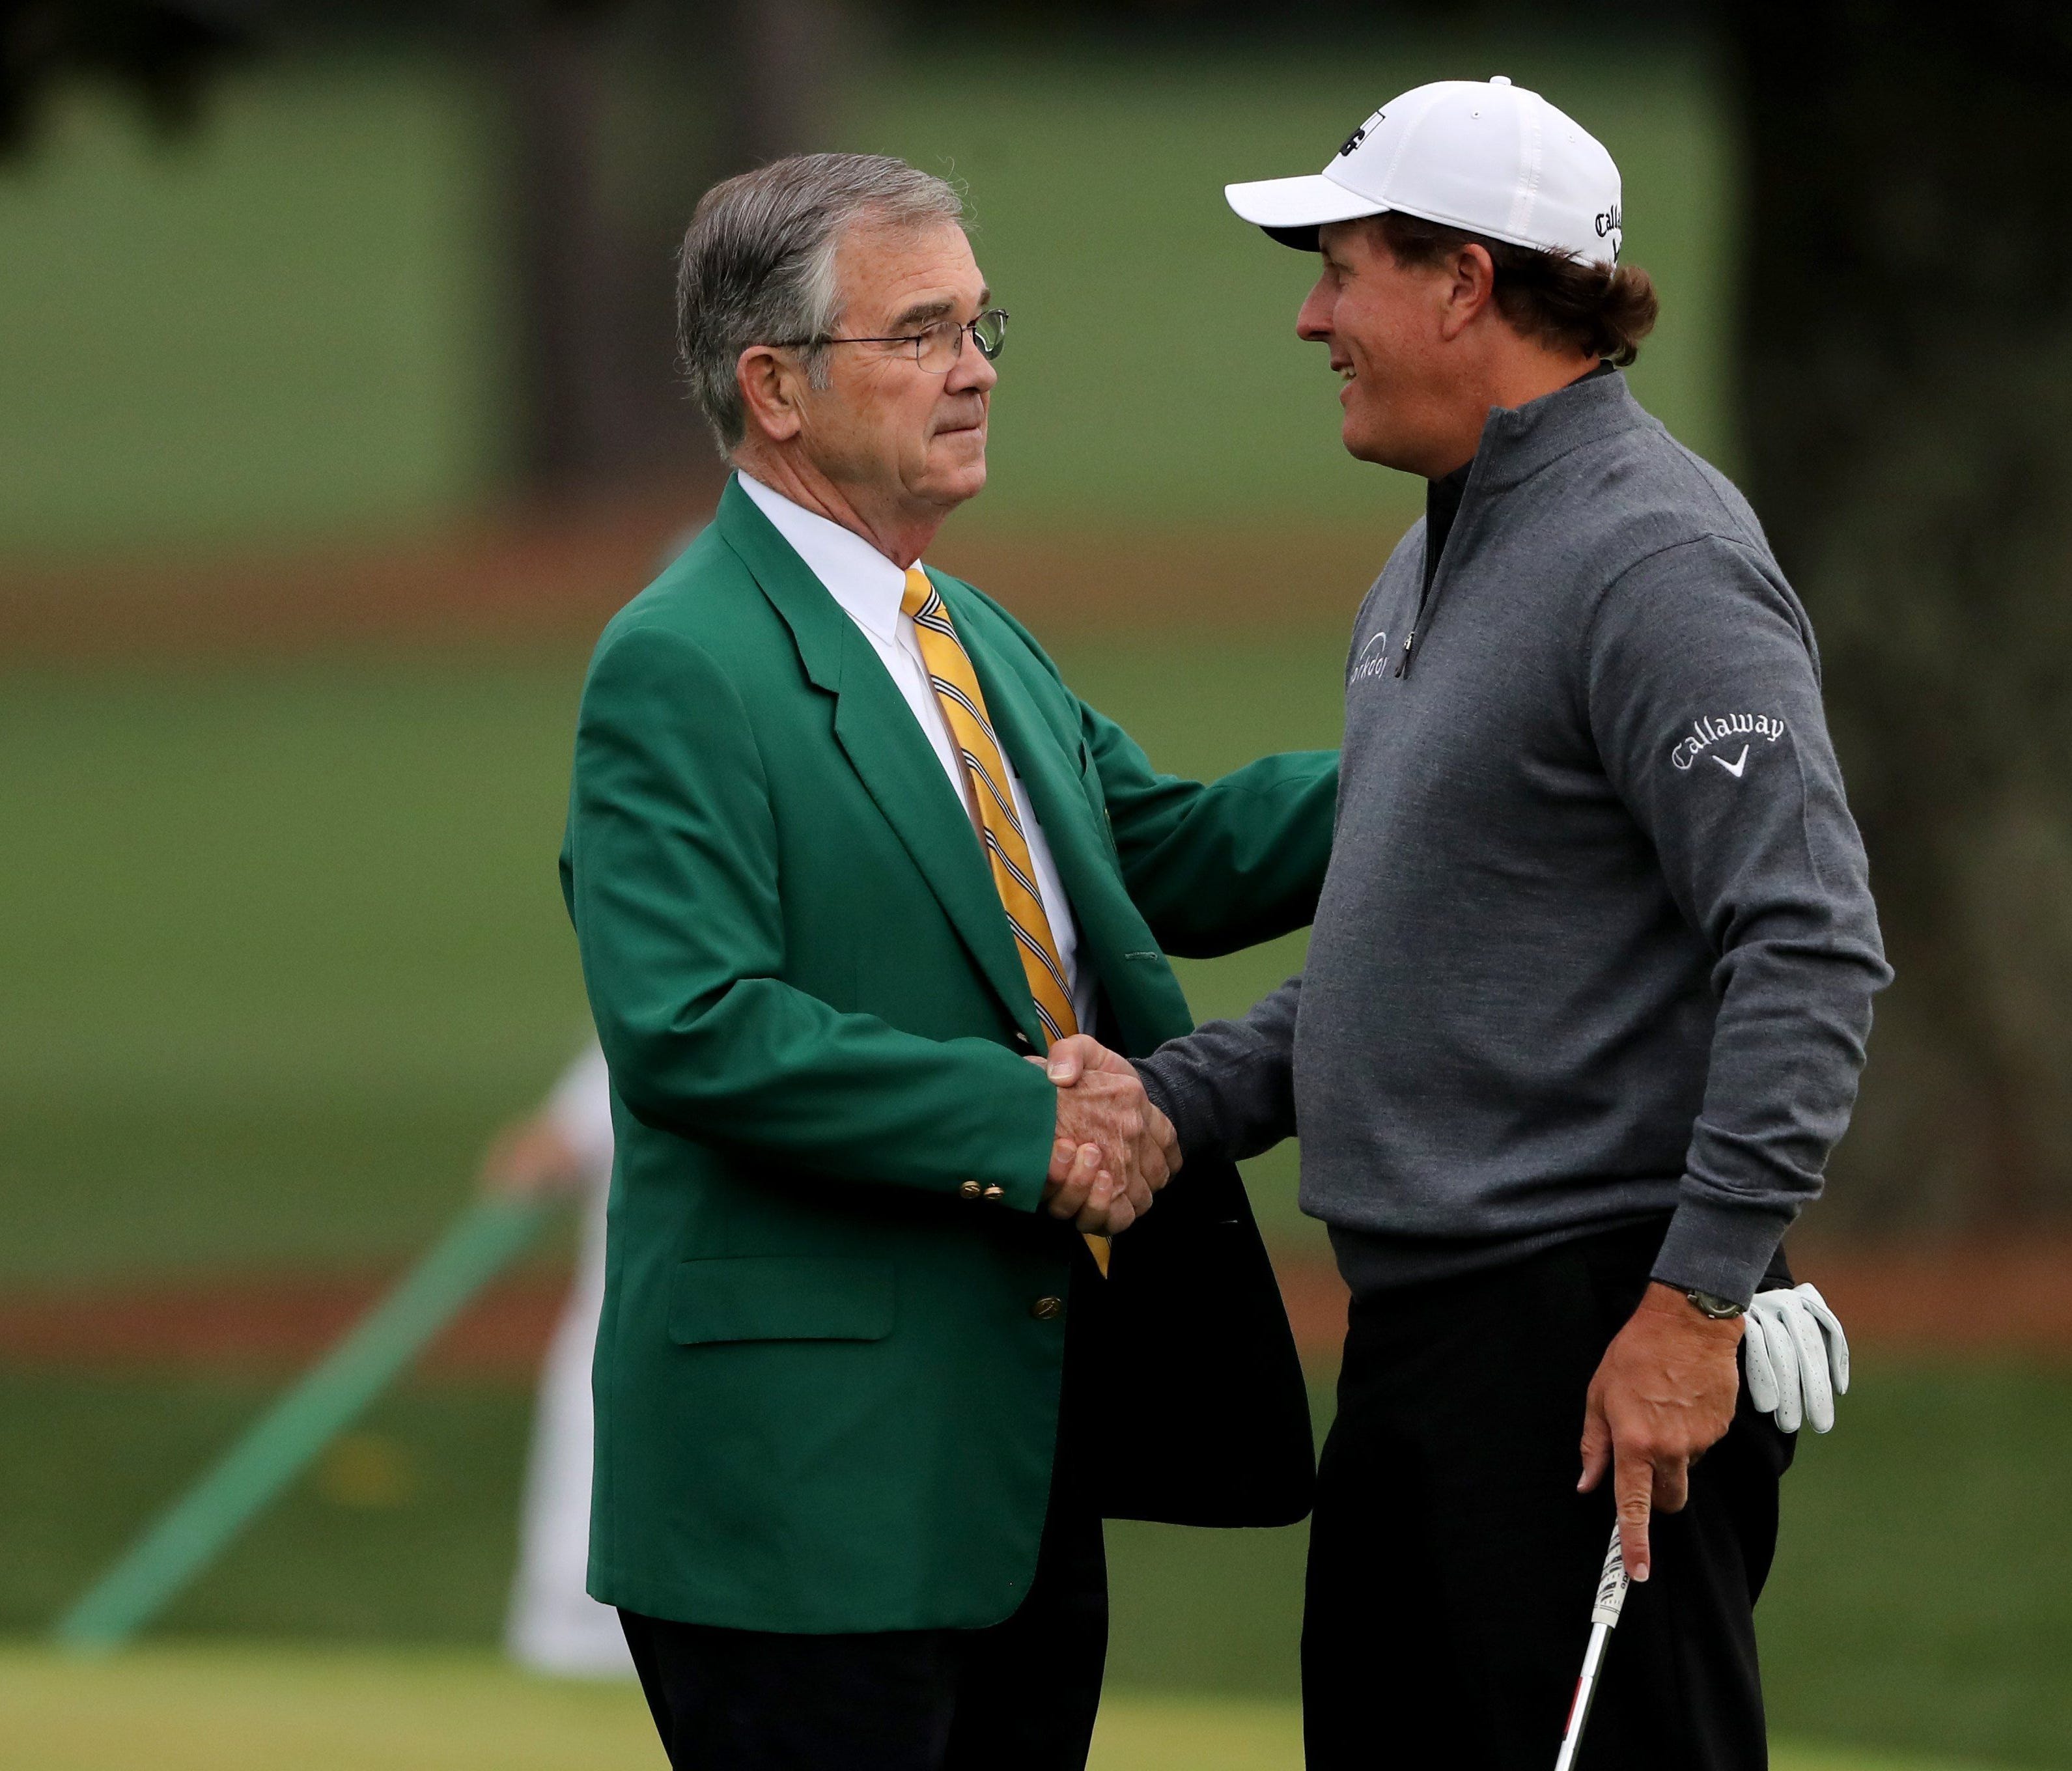 Billy Payne, the chairman of Augusta National Golf Club, shakes hands with Phil Mickelson on Wednesday.